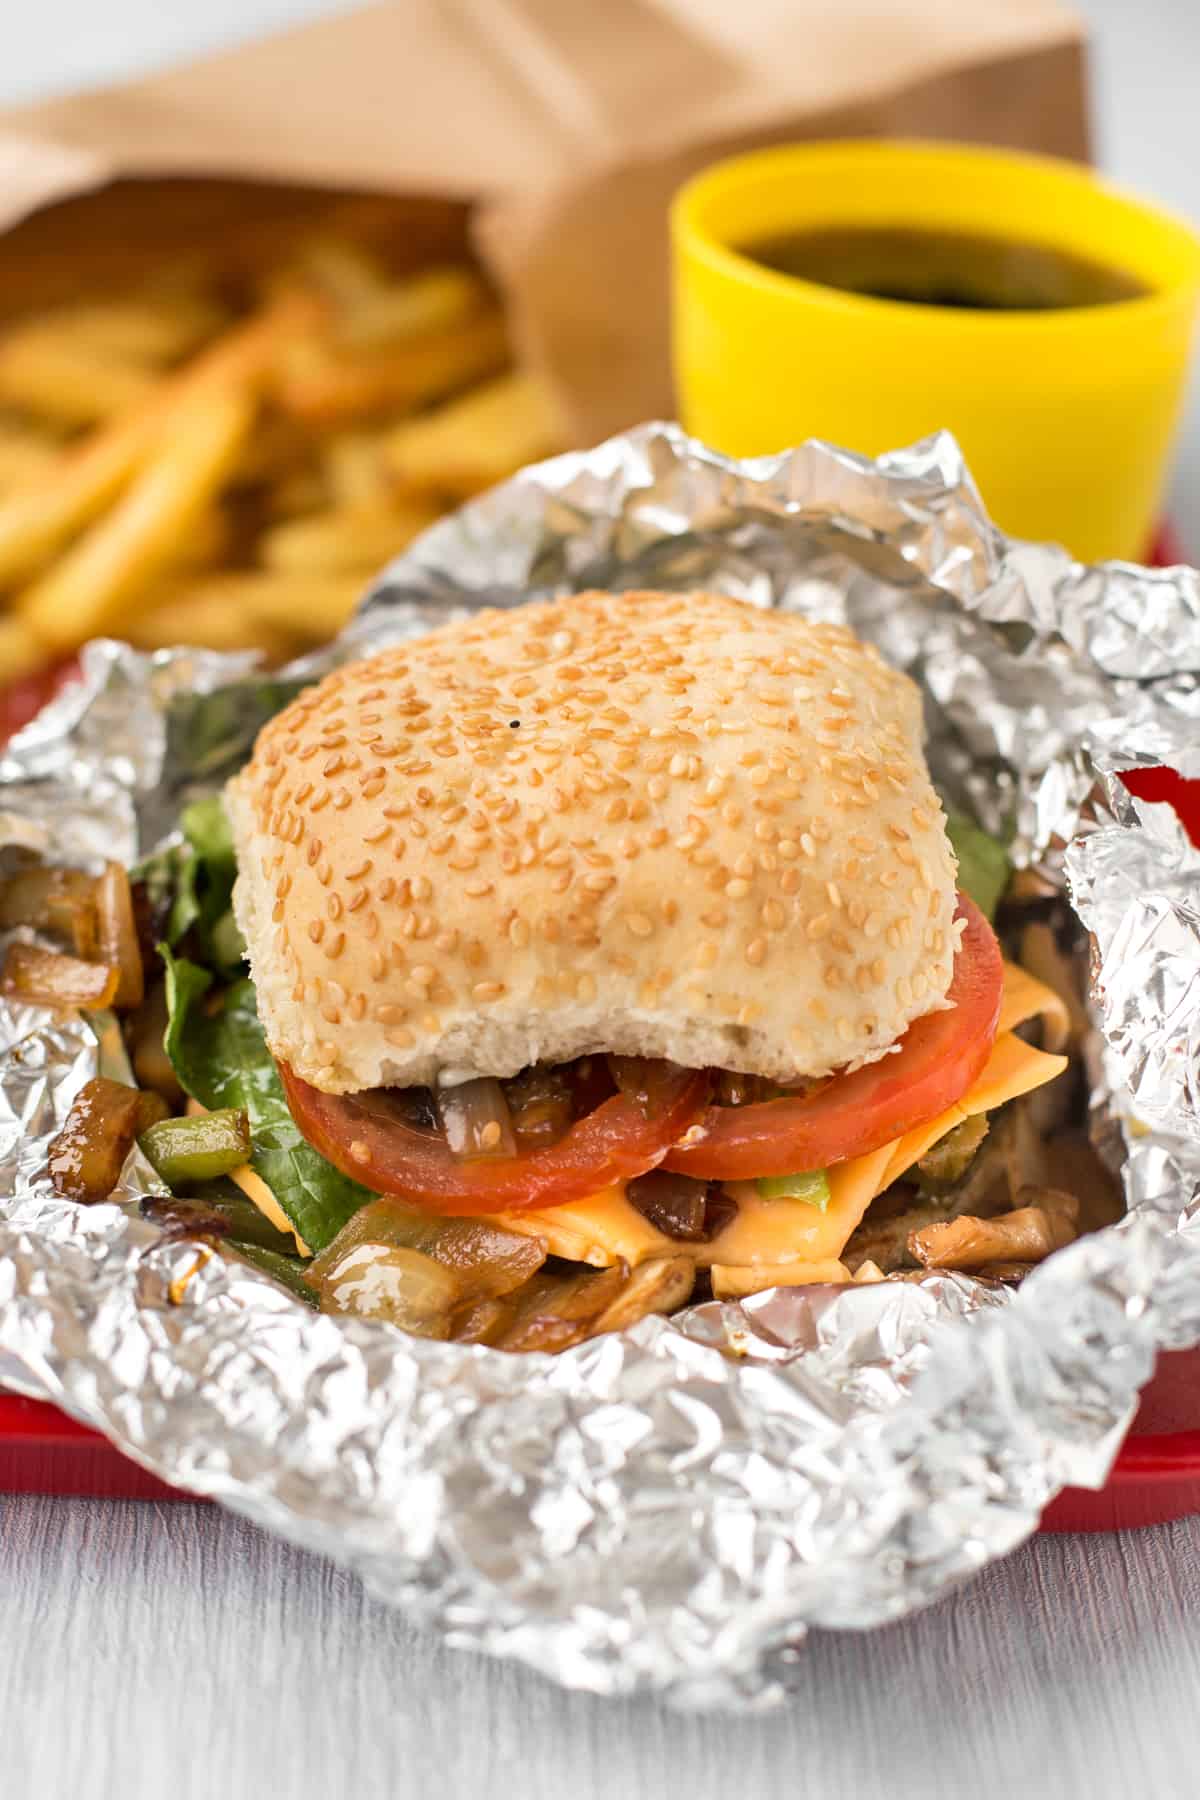 Does Five Guys Have a Veggie Burger? 